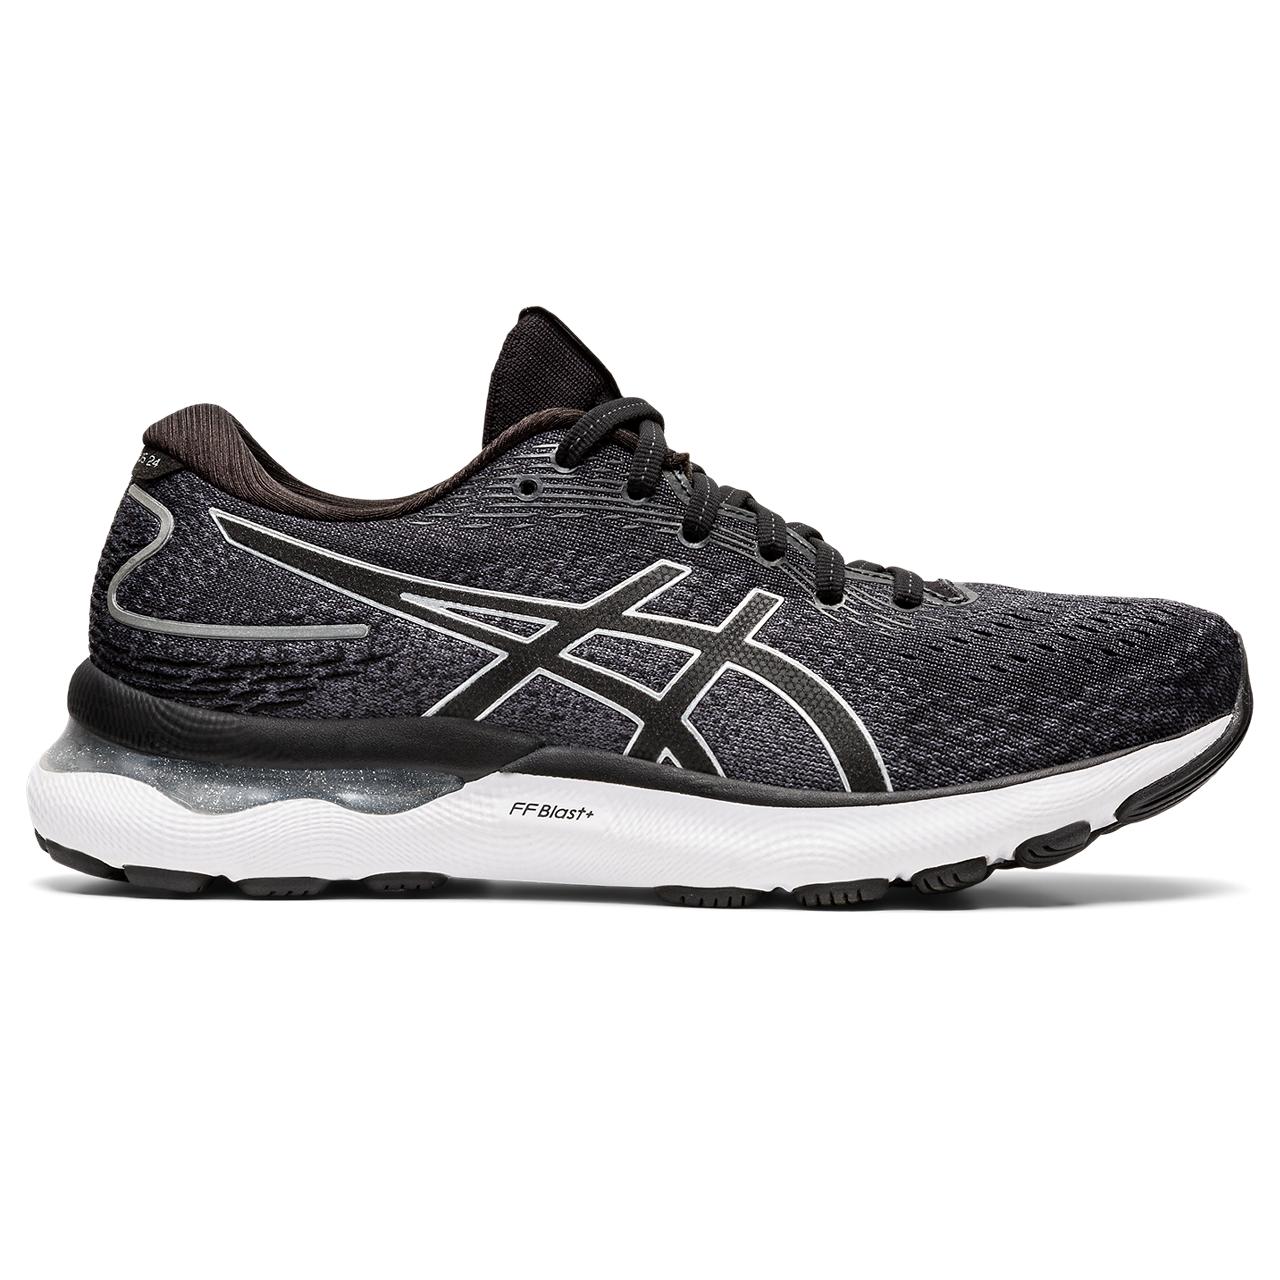 The Women's Nimbus 24 is one of the classics from ASICS.  It's been one of the best-selling cushioned neutral shoes for many years and will no doubt continue that trend with version 24. Women's Gel-Nimbus 24 - Wide "D" This is the wide version of the Black and White colorway. 